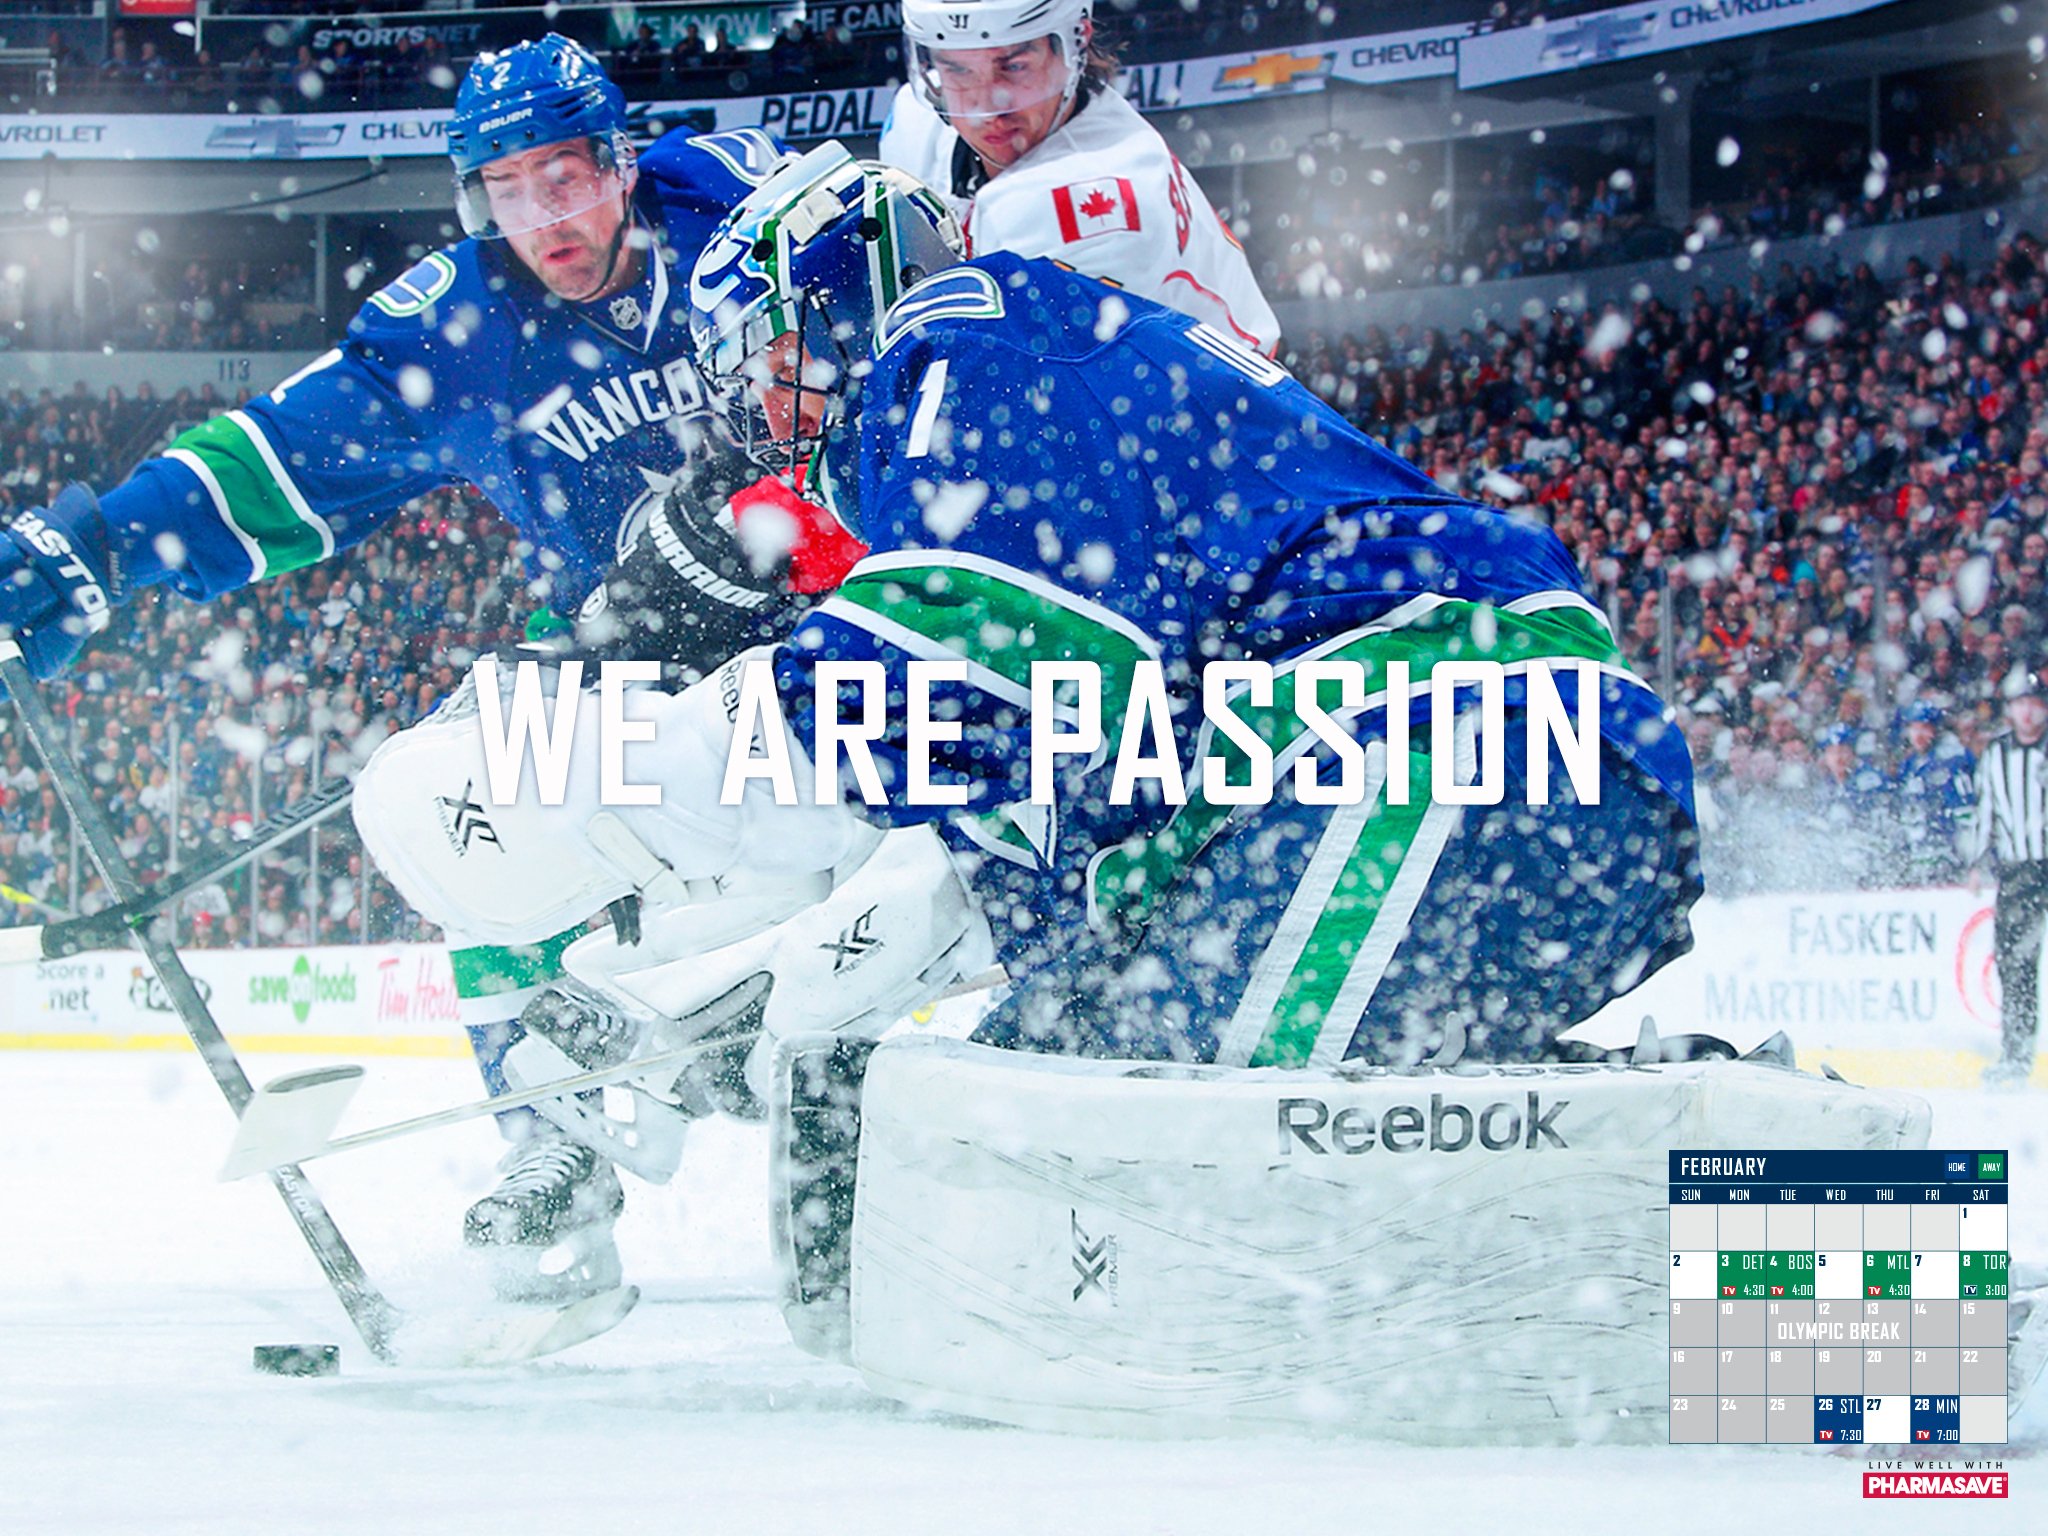 Vancouver Canucks Nhl Hockey 70 Wallpapers Hd Desktop And Images, Photos, Reviews